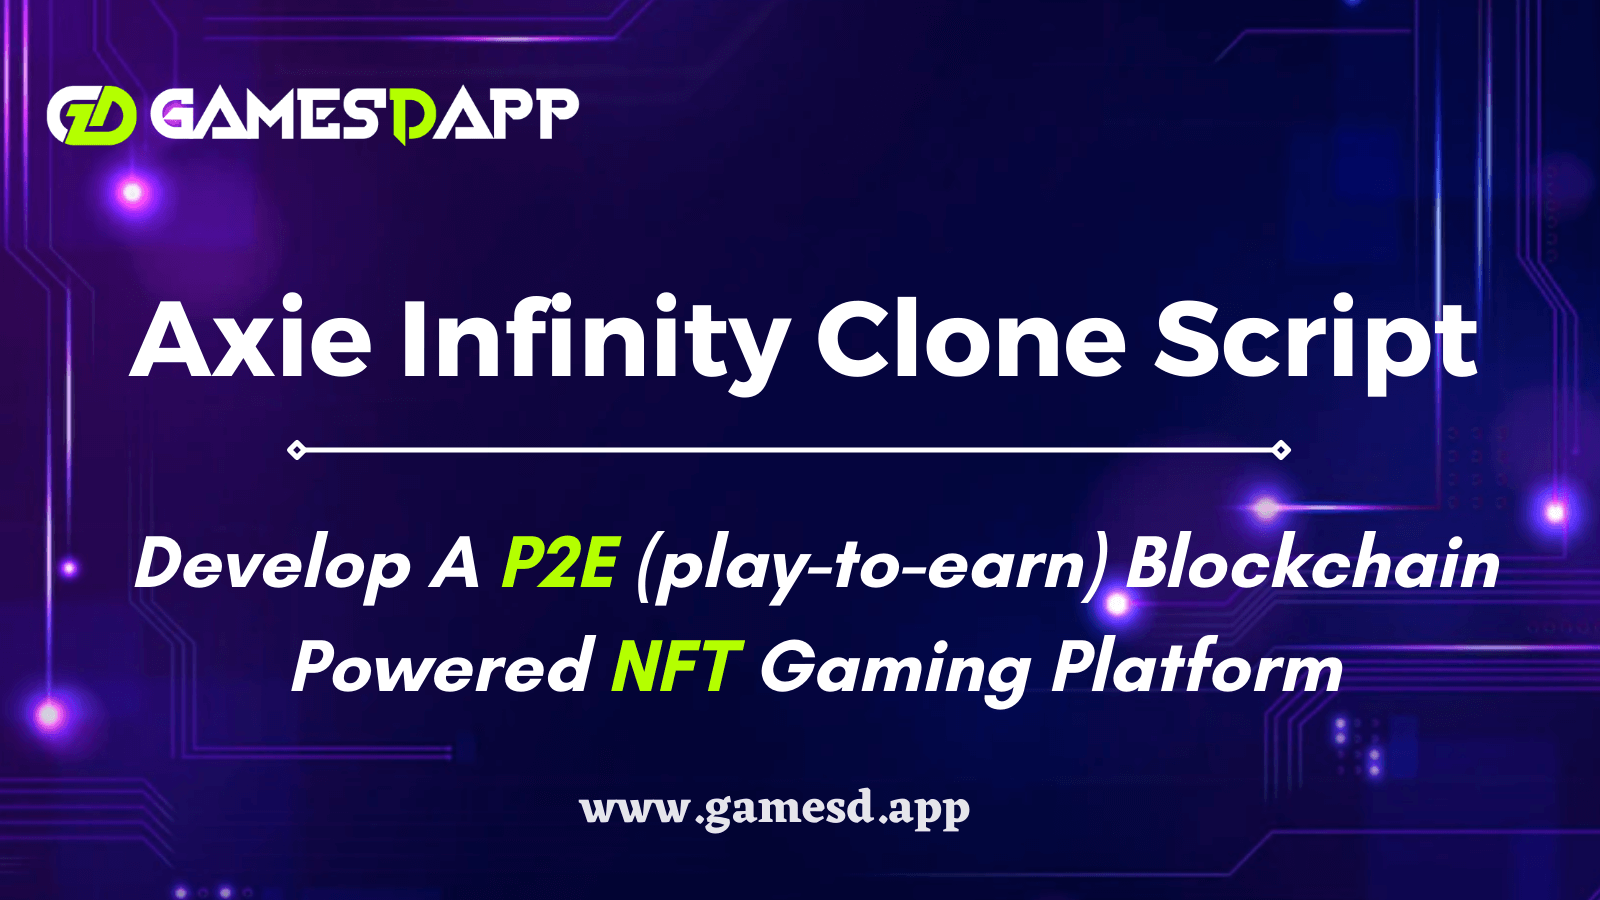 Are you ready to Start your NFT market place with axie infinity clone script?